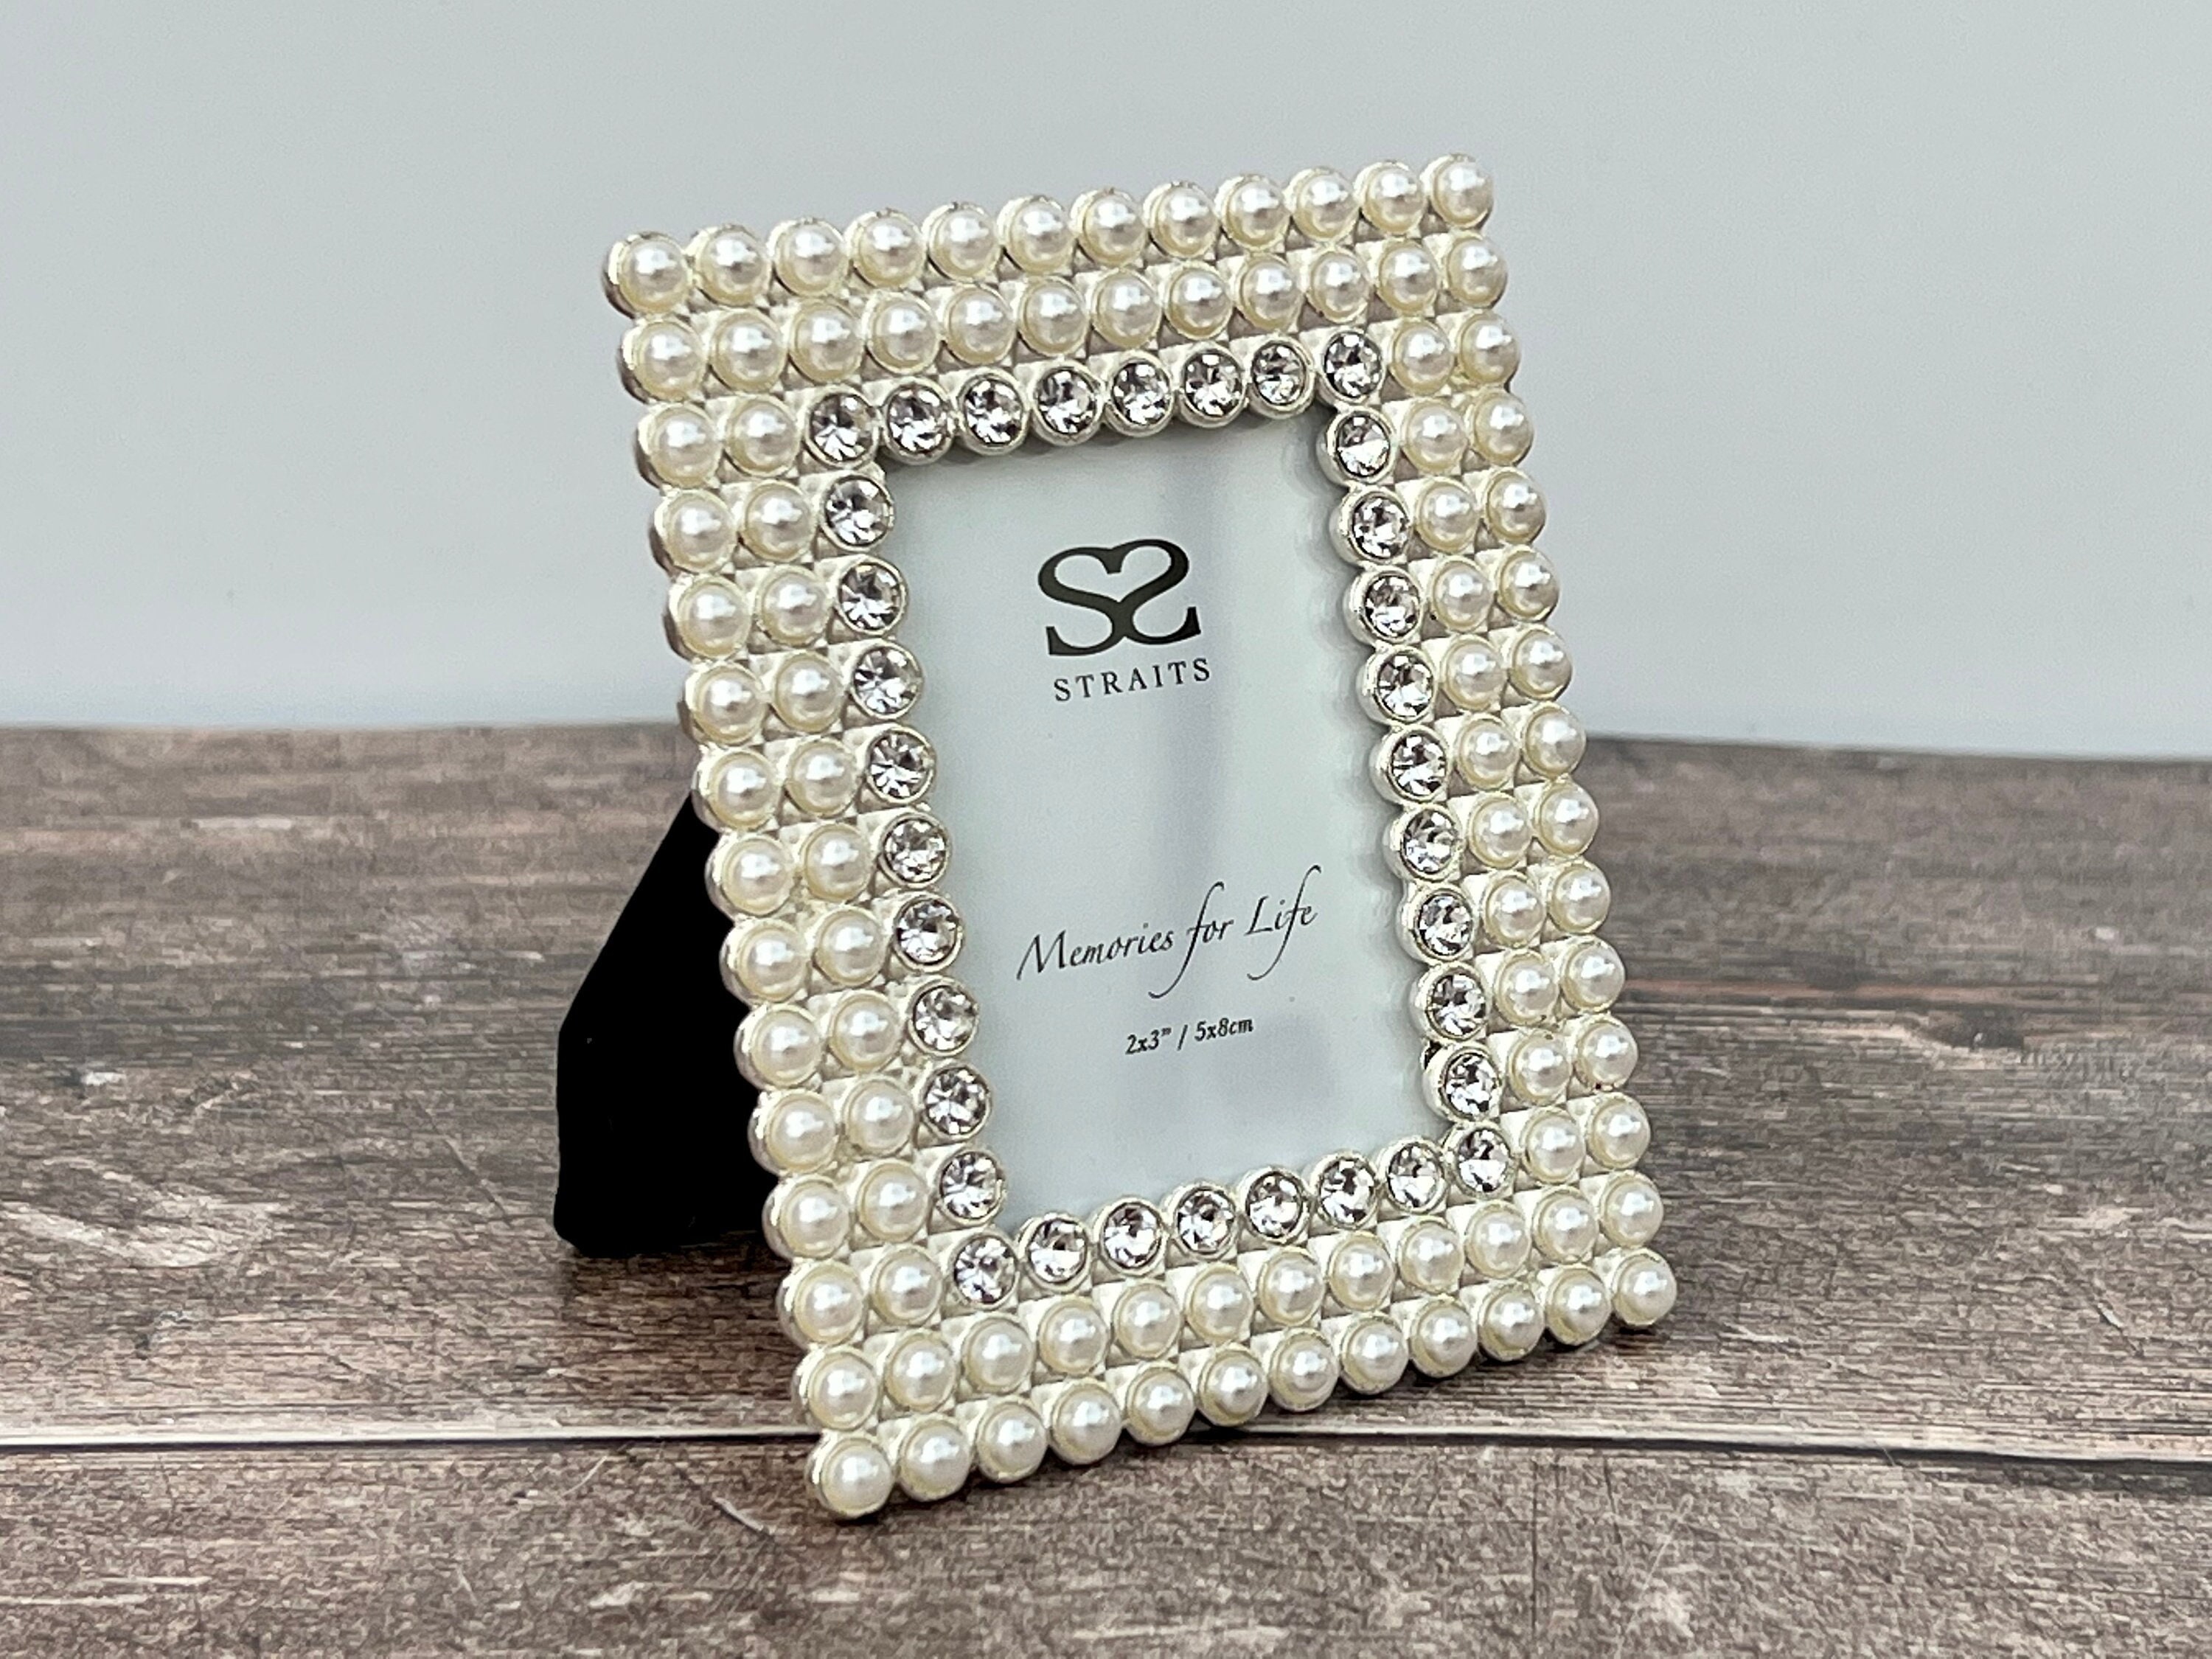  Precious Pearls Jeweled Mini Photo Frame in Gift Box, 3  Assorted Styles Oval, Circle, and Square Shaped